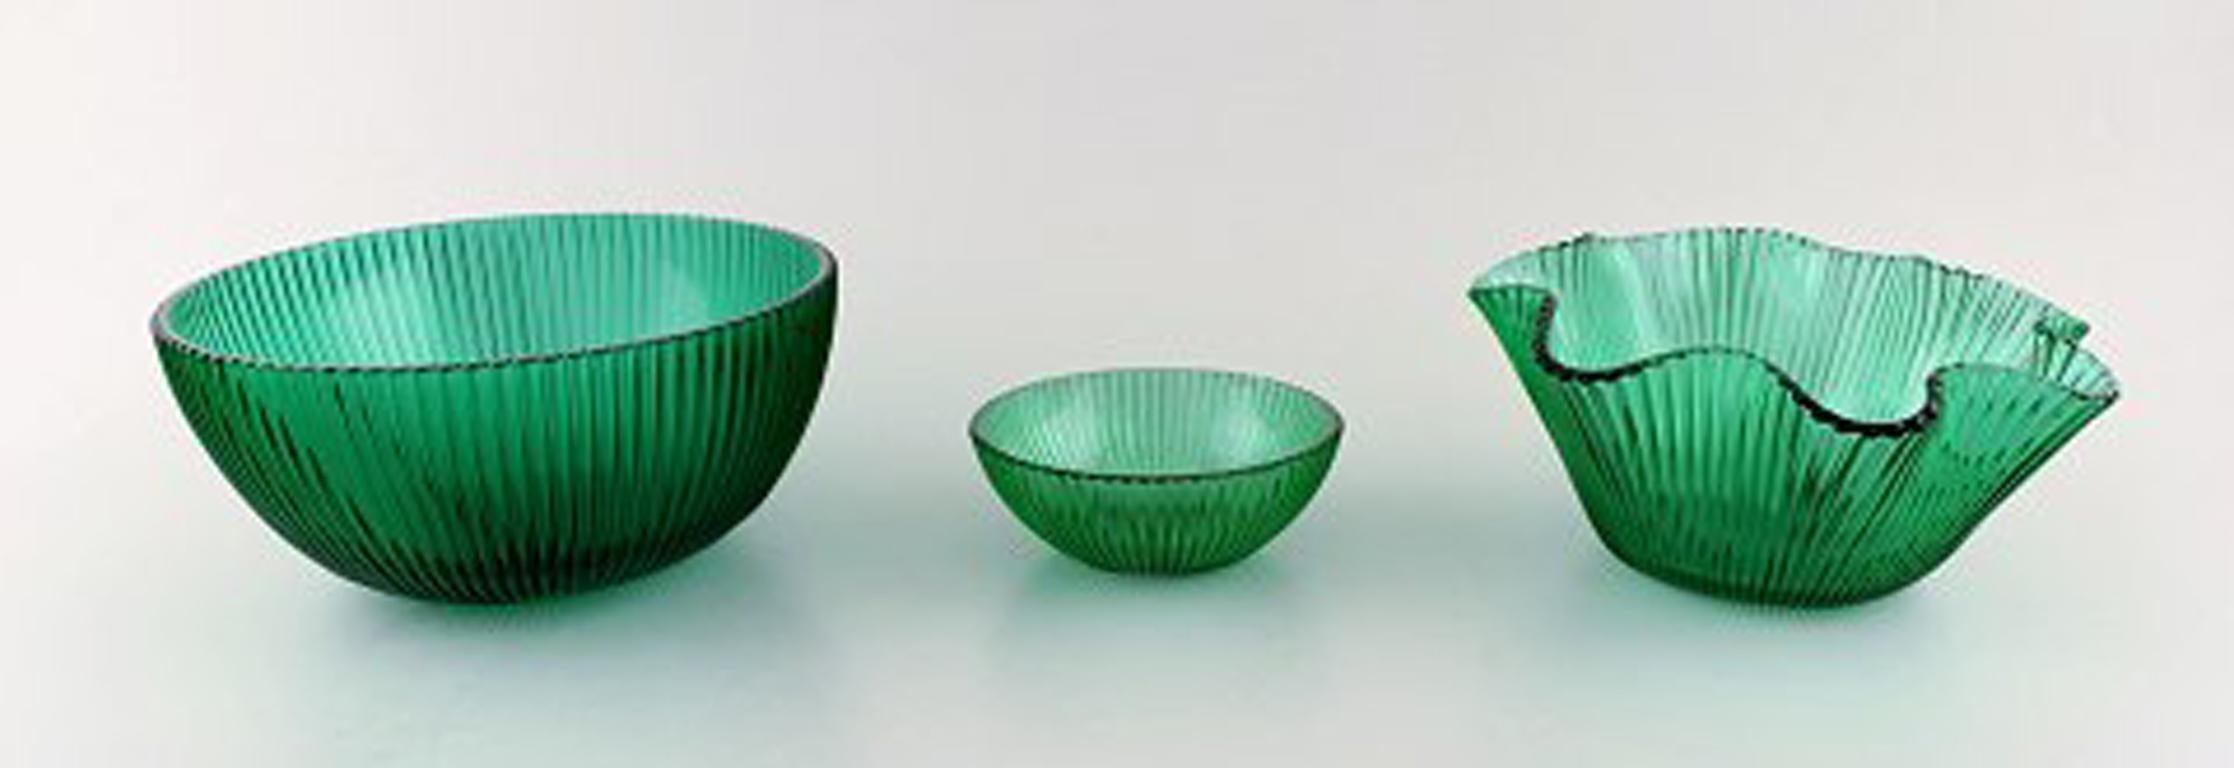 Arthur Percy for Nybro, Sweden. 3 bowls in green art glass. Fluted design.
In perfect condition.
Measures: 21 cm x 10 cm. 20 cm x 9.5 cm. 12 cm x 5 cm.